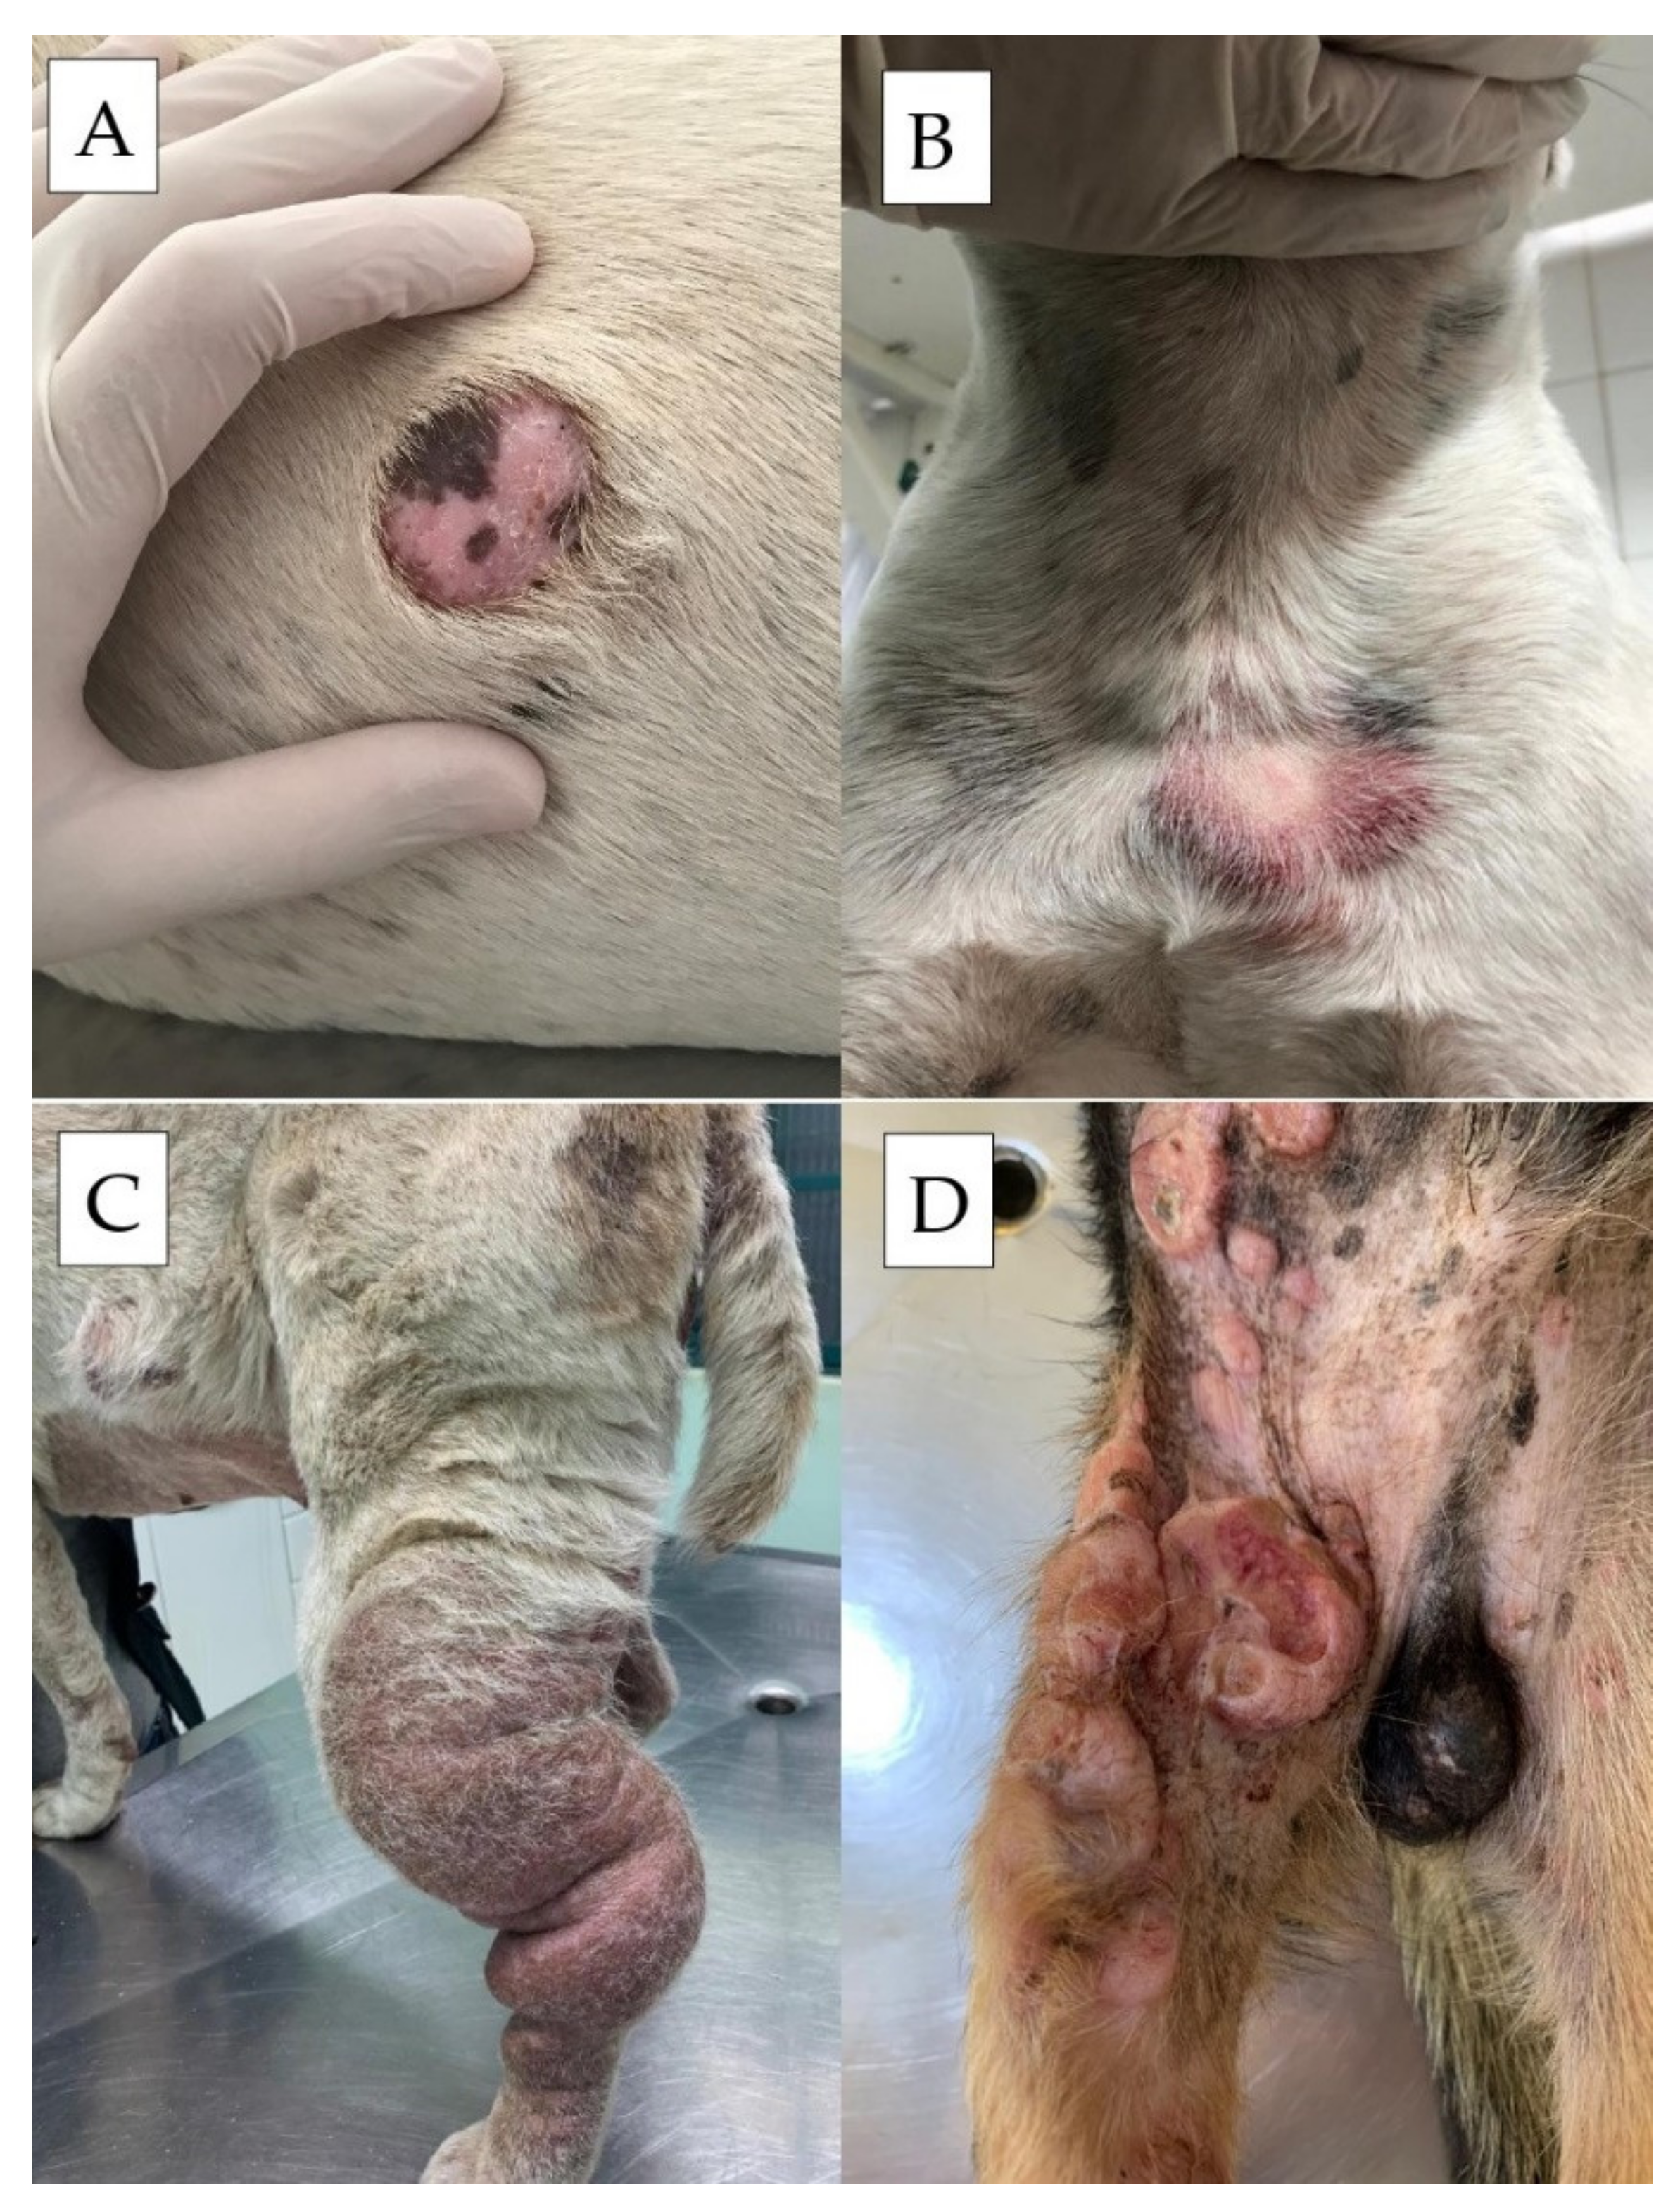 Cells | Free Full-Text | Diagnosis, Prognosis and Treatment of Canine  Cutaneous and Subcutaneous Mast Cell Tumors